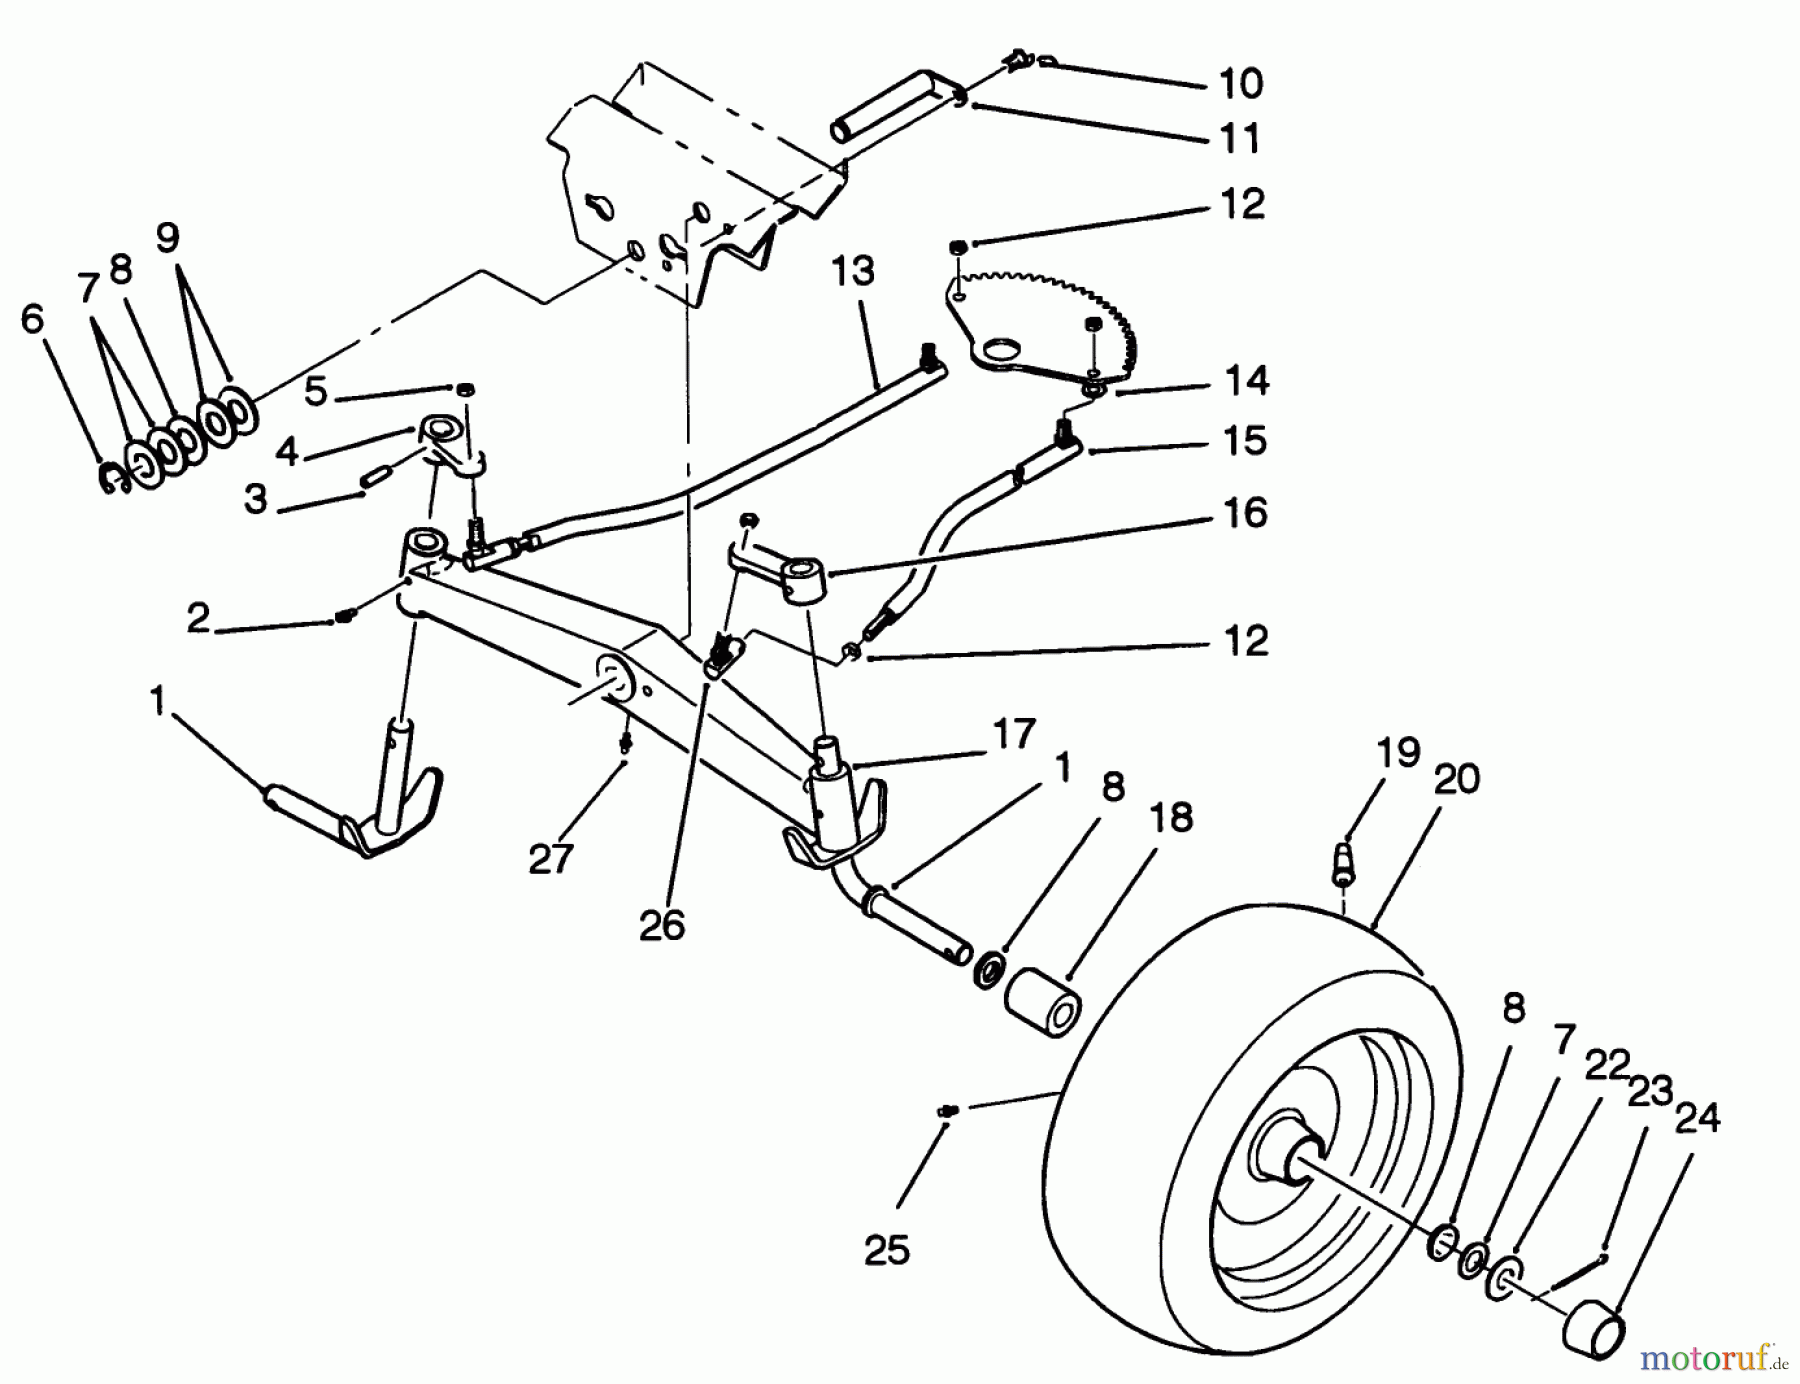  Toro Neu Mowers, Lawn & Garden Tractor Seite 1 42-16BE01 (246-H) - Toro 246-H Yard Tractor, 1992 (2000001-2999999) FRONT AXLE ASSEMBLY